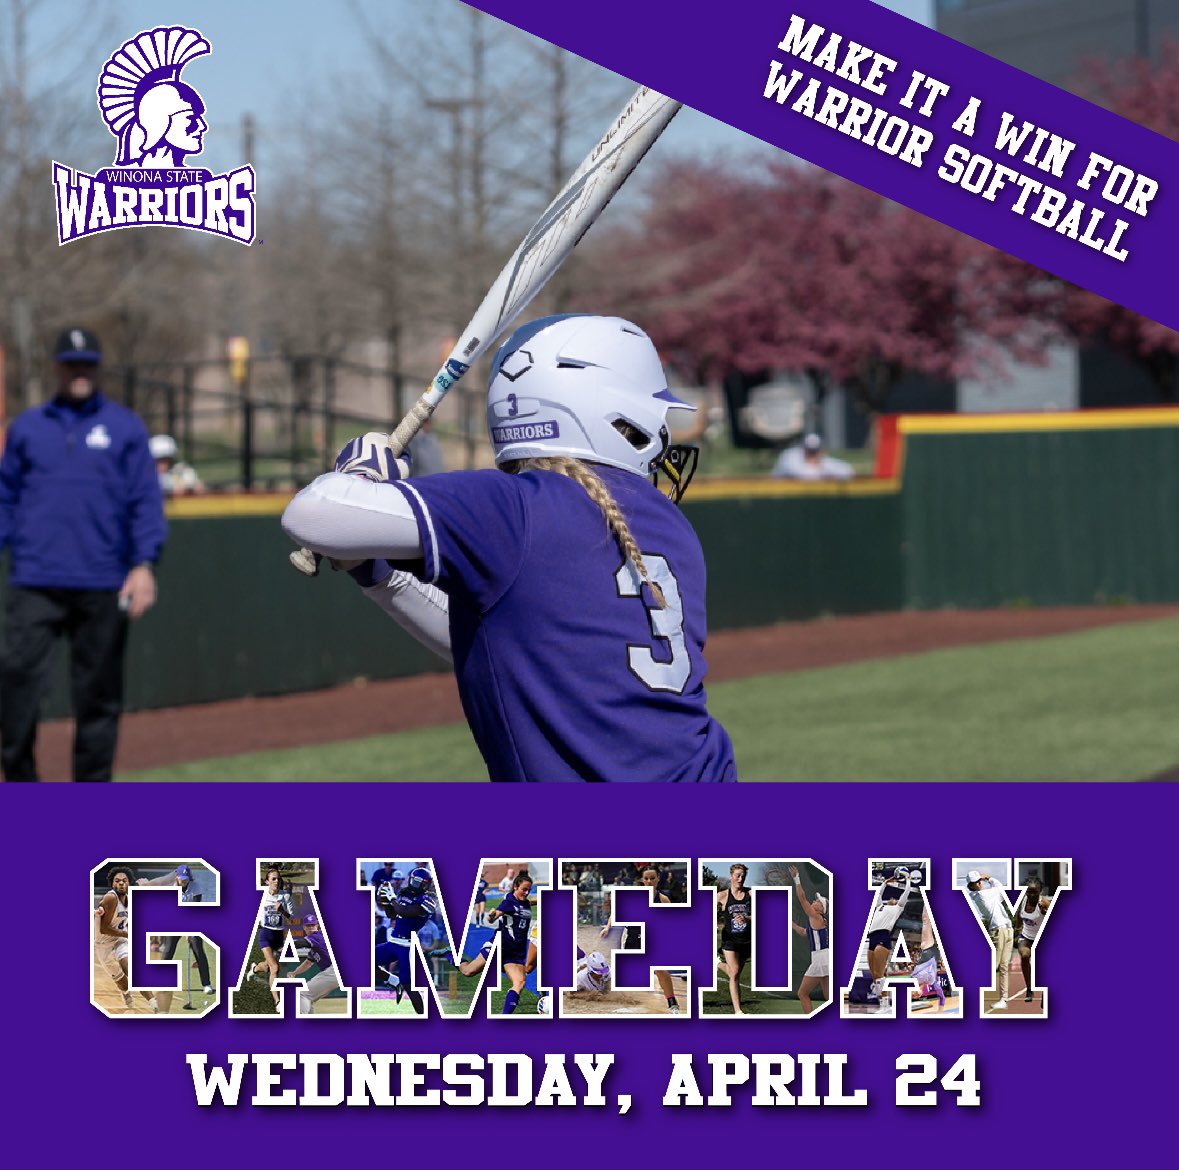 Today is the day! Our annual WSU Softball Giving Day! Please click the link below to show your generosity to WSU Softball! We appreciate YOU and your continued support, Warrior Nation! Thank you! gameday.winona.edu/campaigns/soft…